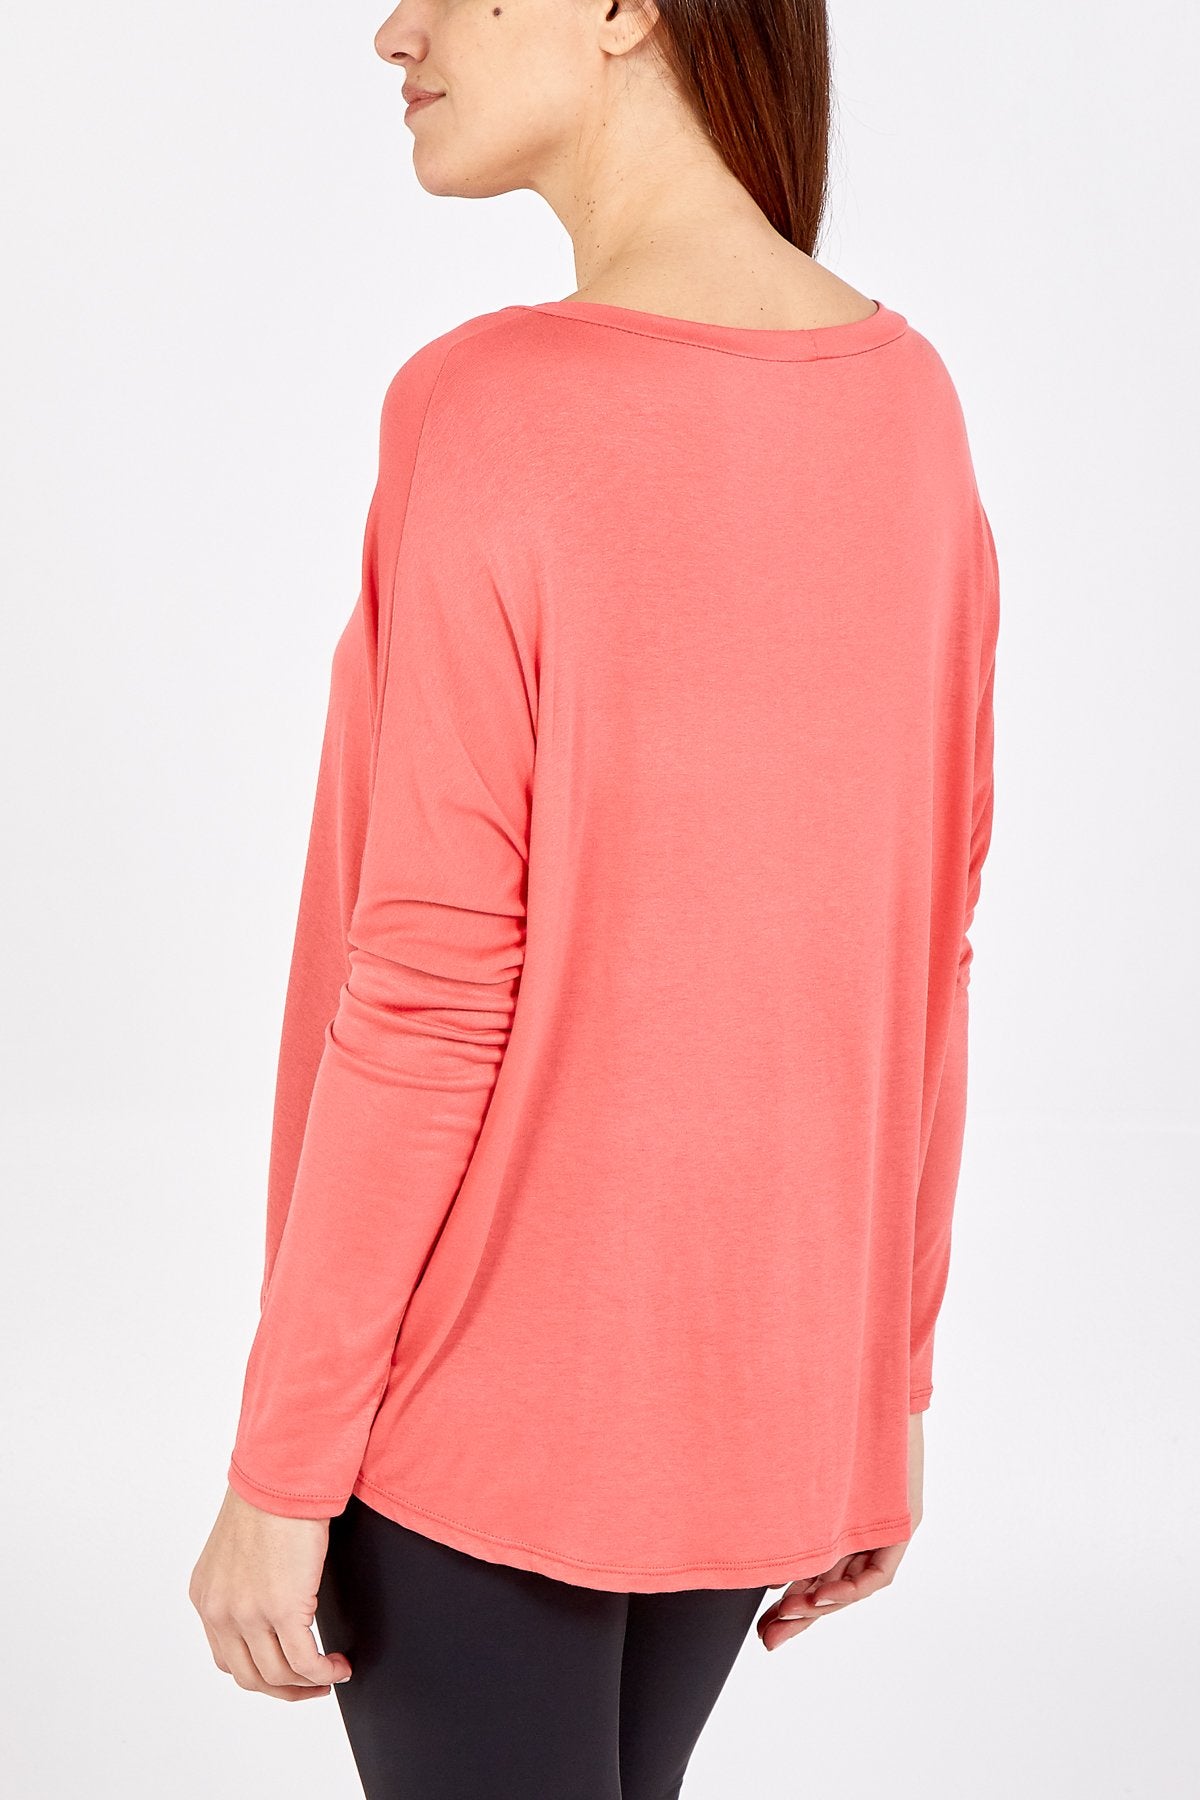 Long Sleeve HiLo Tee - Coral - Liven Boutique